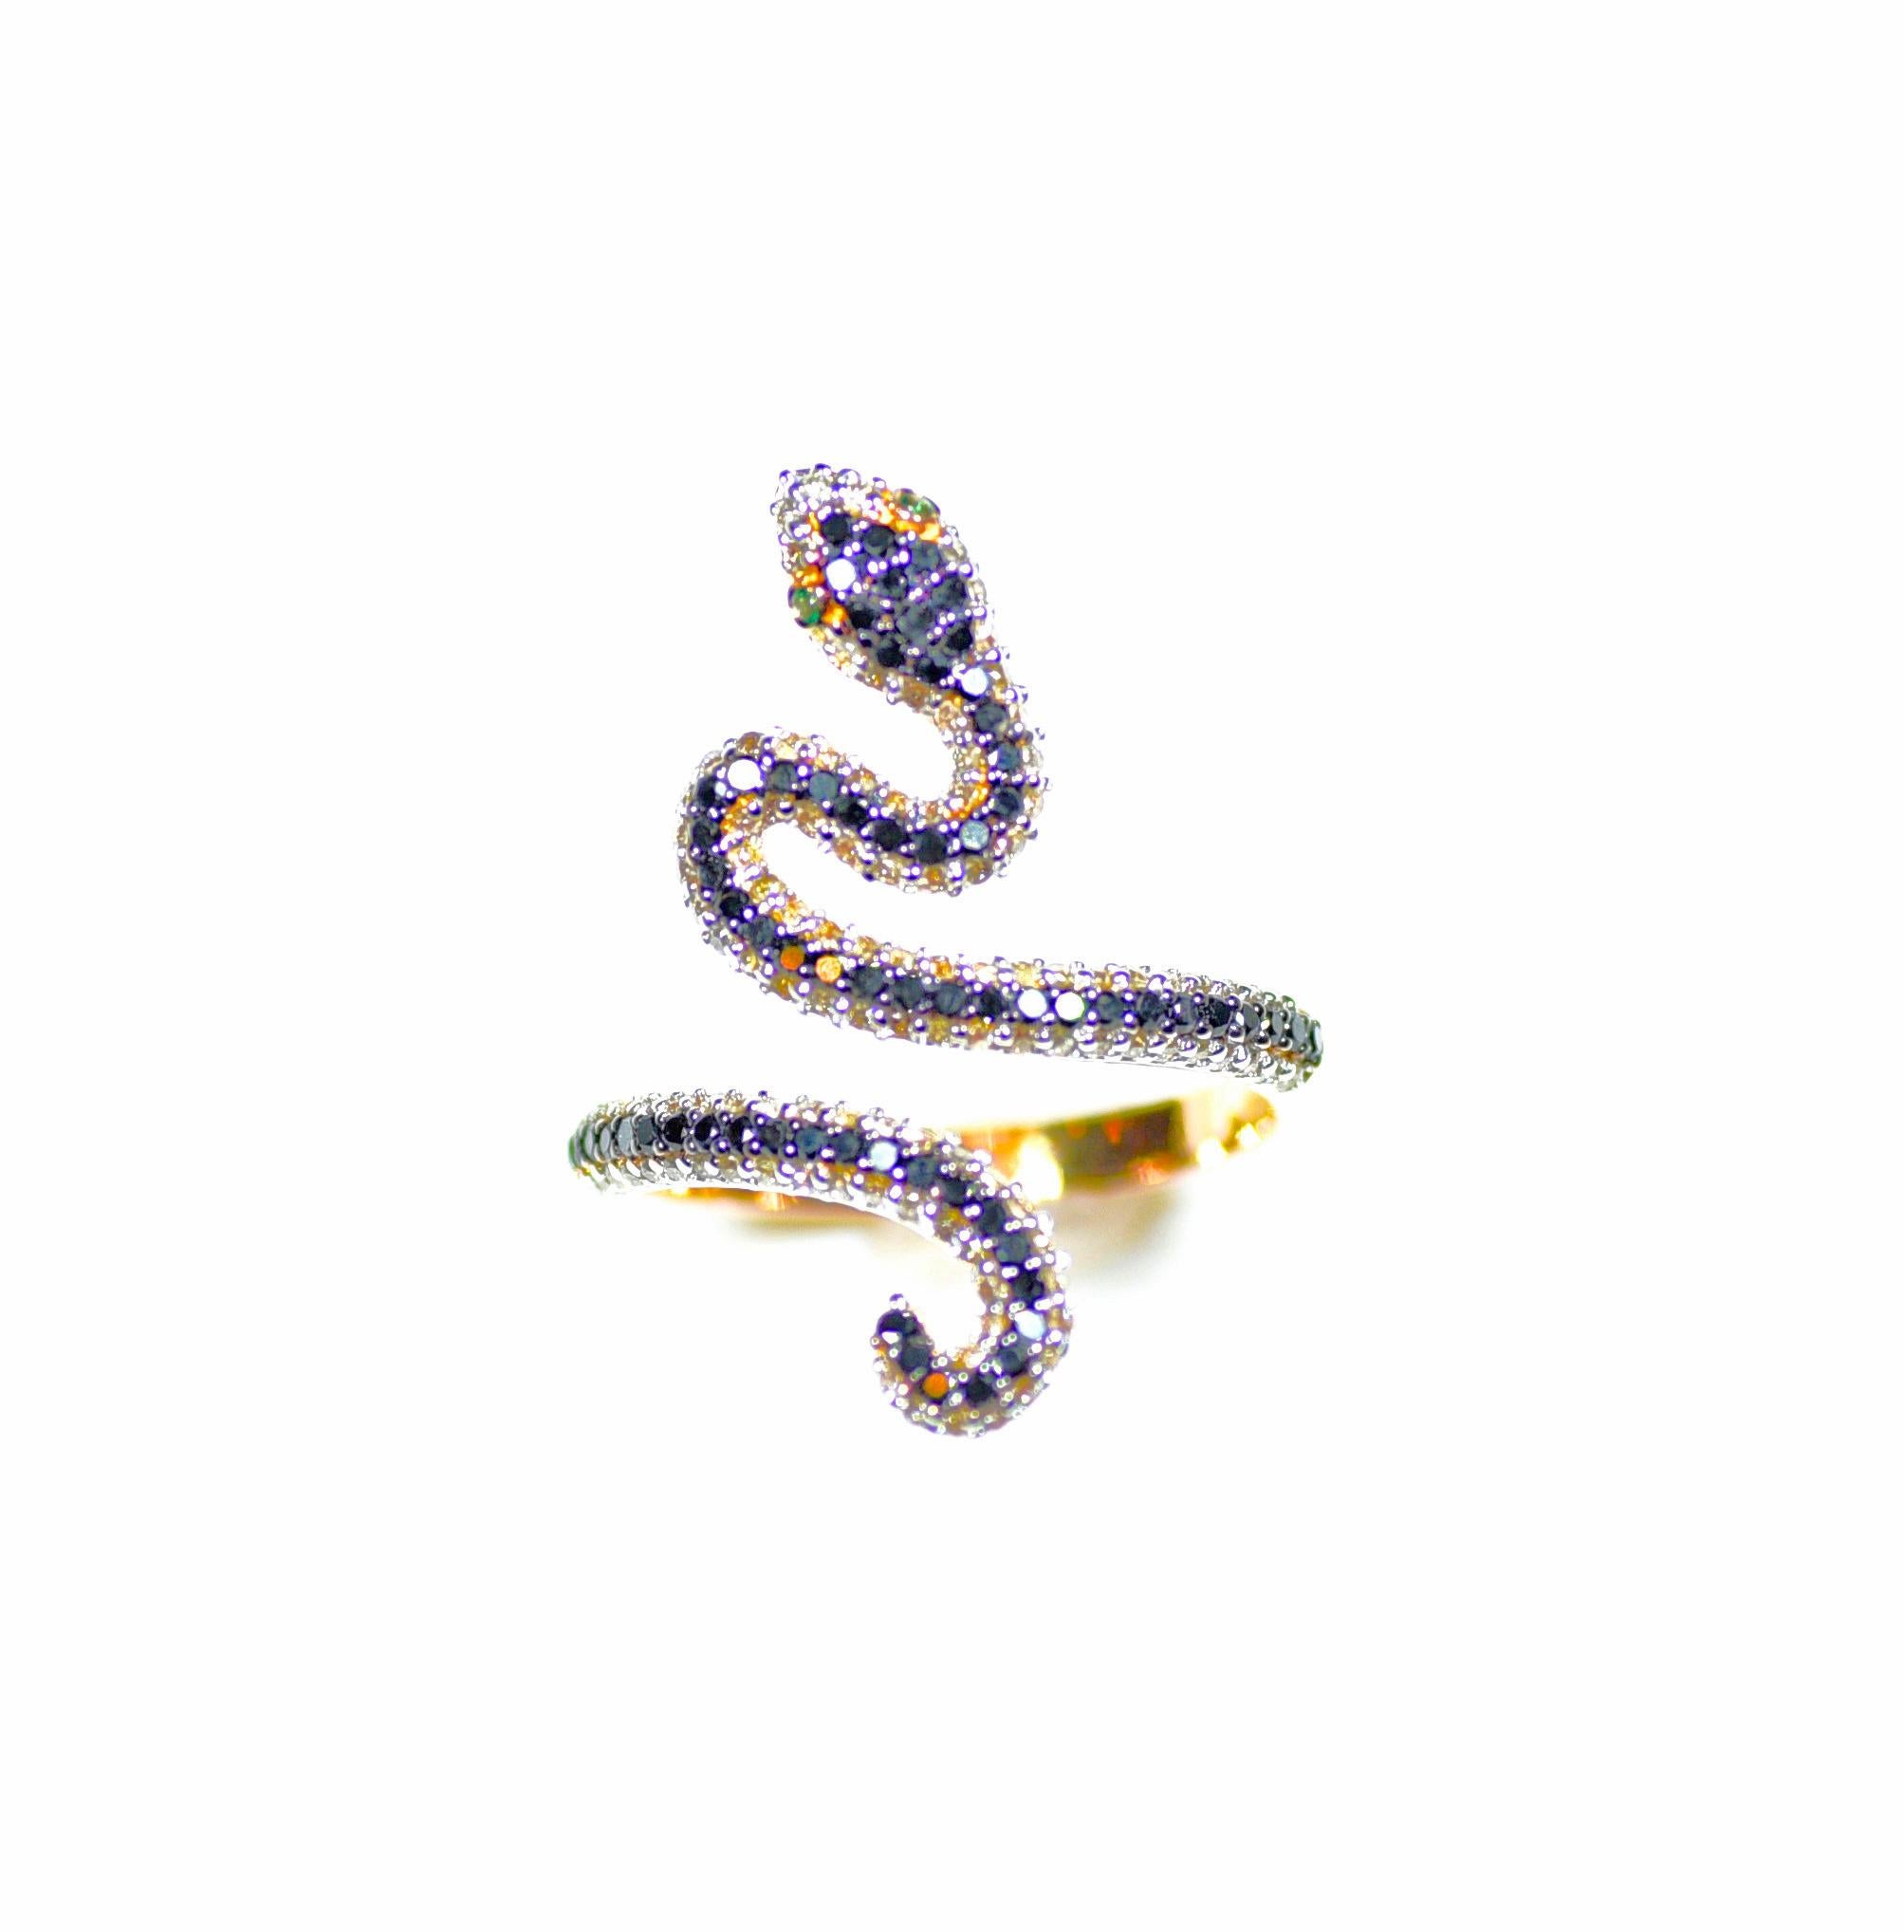 This unique & chic snake diamond ring with sparkling diamonds set in fine 18k rose gold will add a timeless sparkle & shine to you chosen style. 
Most of our jewels are made to order, so please allow us for a 2-4 week delivery.
Please note the